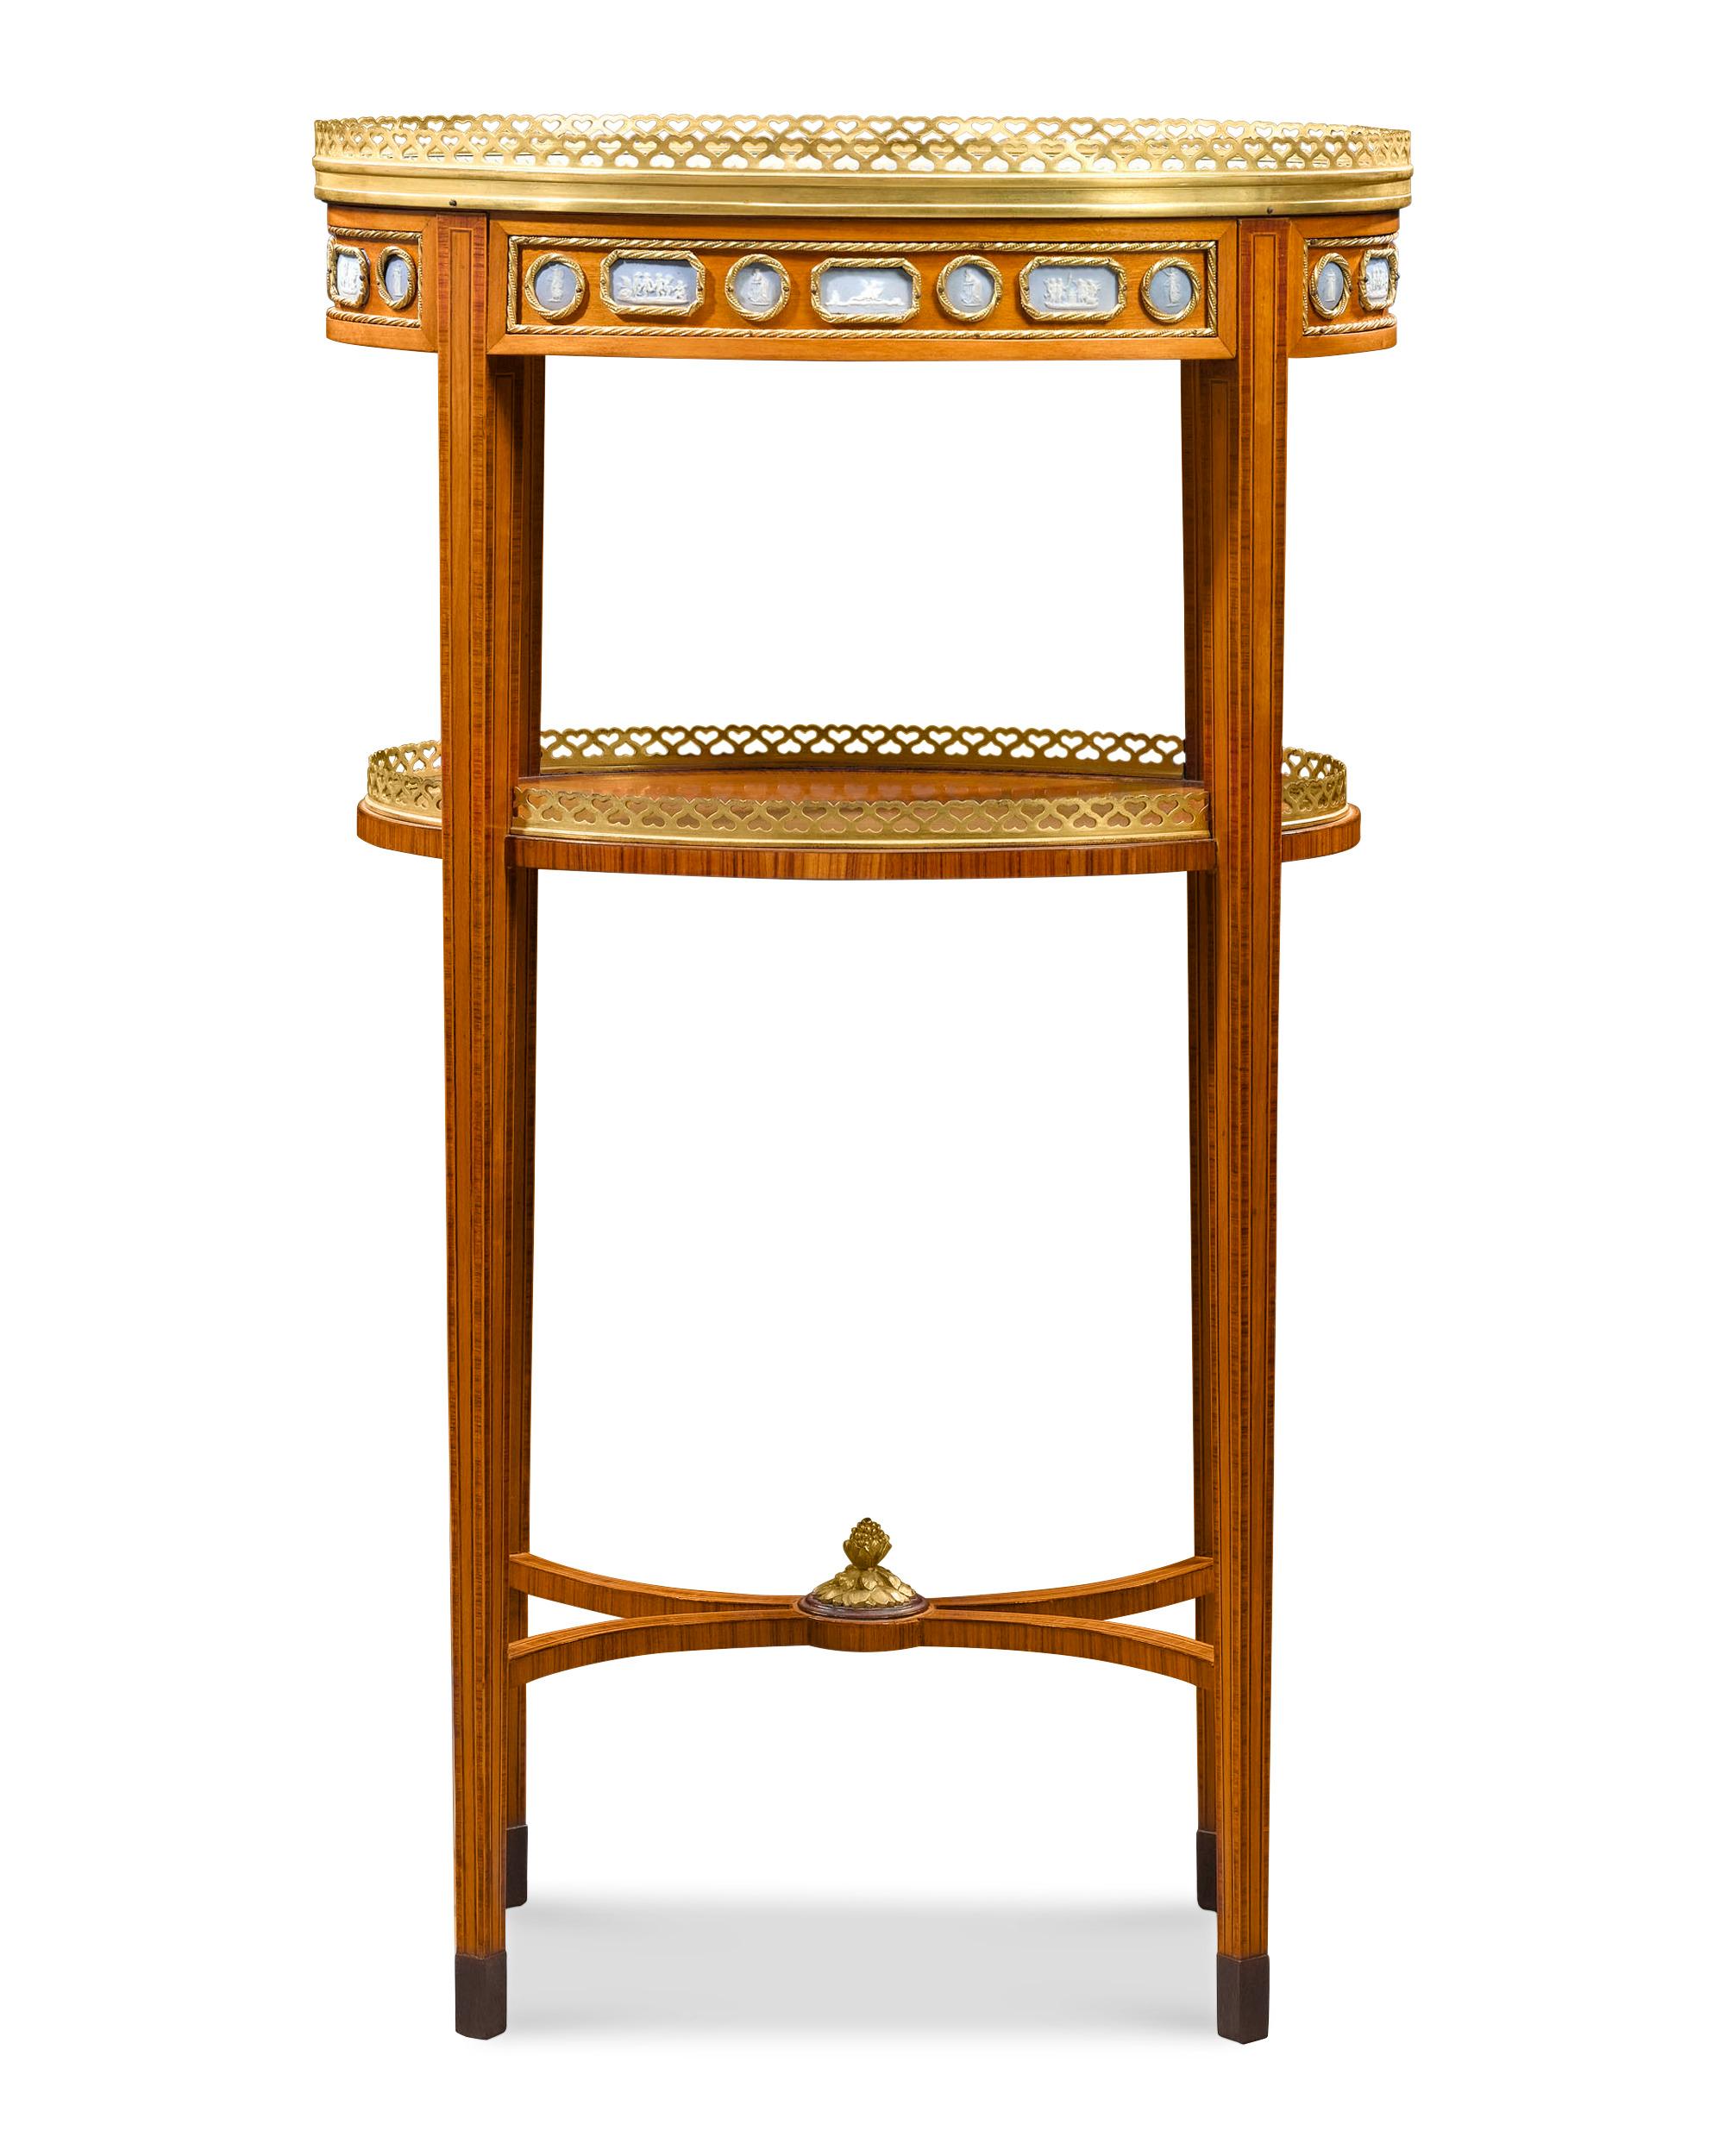 Exquisite craftsmanship in wood is coupled with the elegance of Wedgwood in this remarkable side table. Highly similar to one of French cabinetmaker Francois Linke's most enquired-after designs at the 1904 World's Fair in St. Louis, this outstanding